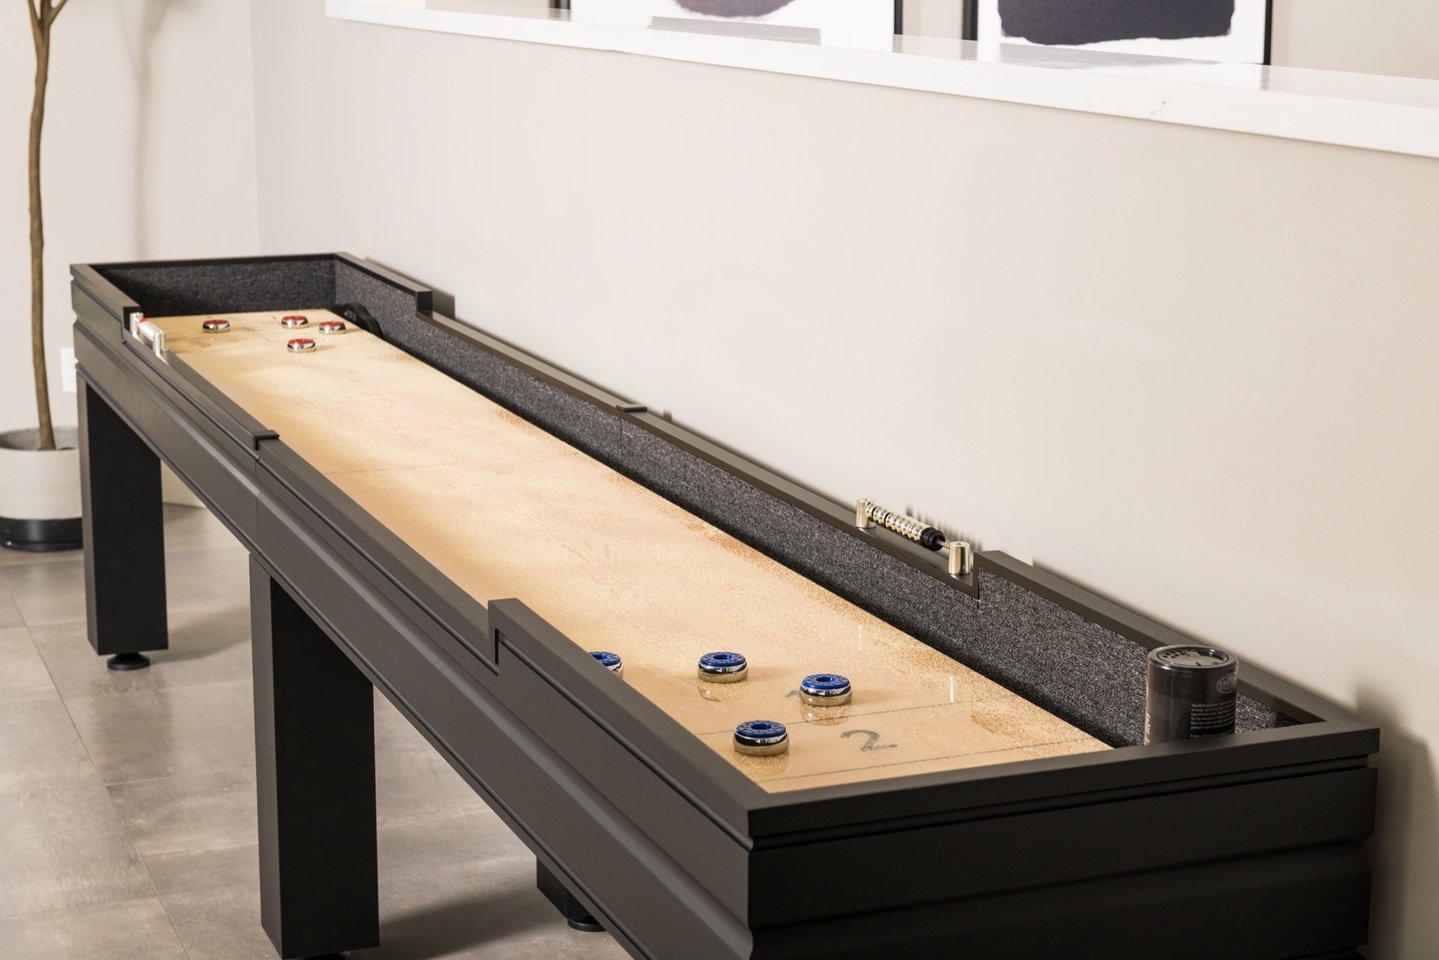 Professional grade shuffleboard table located in great room